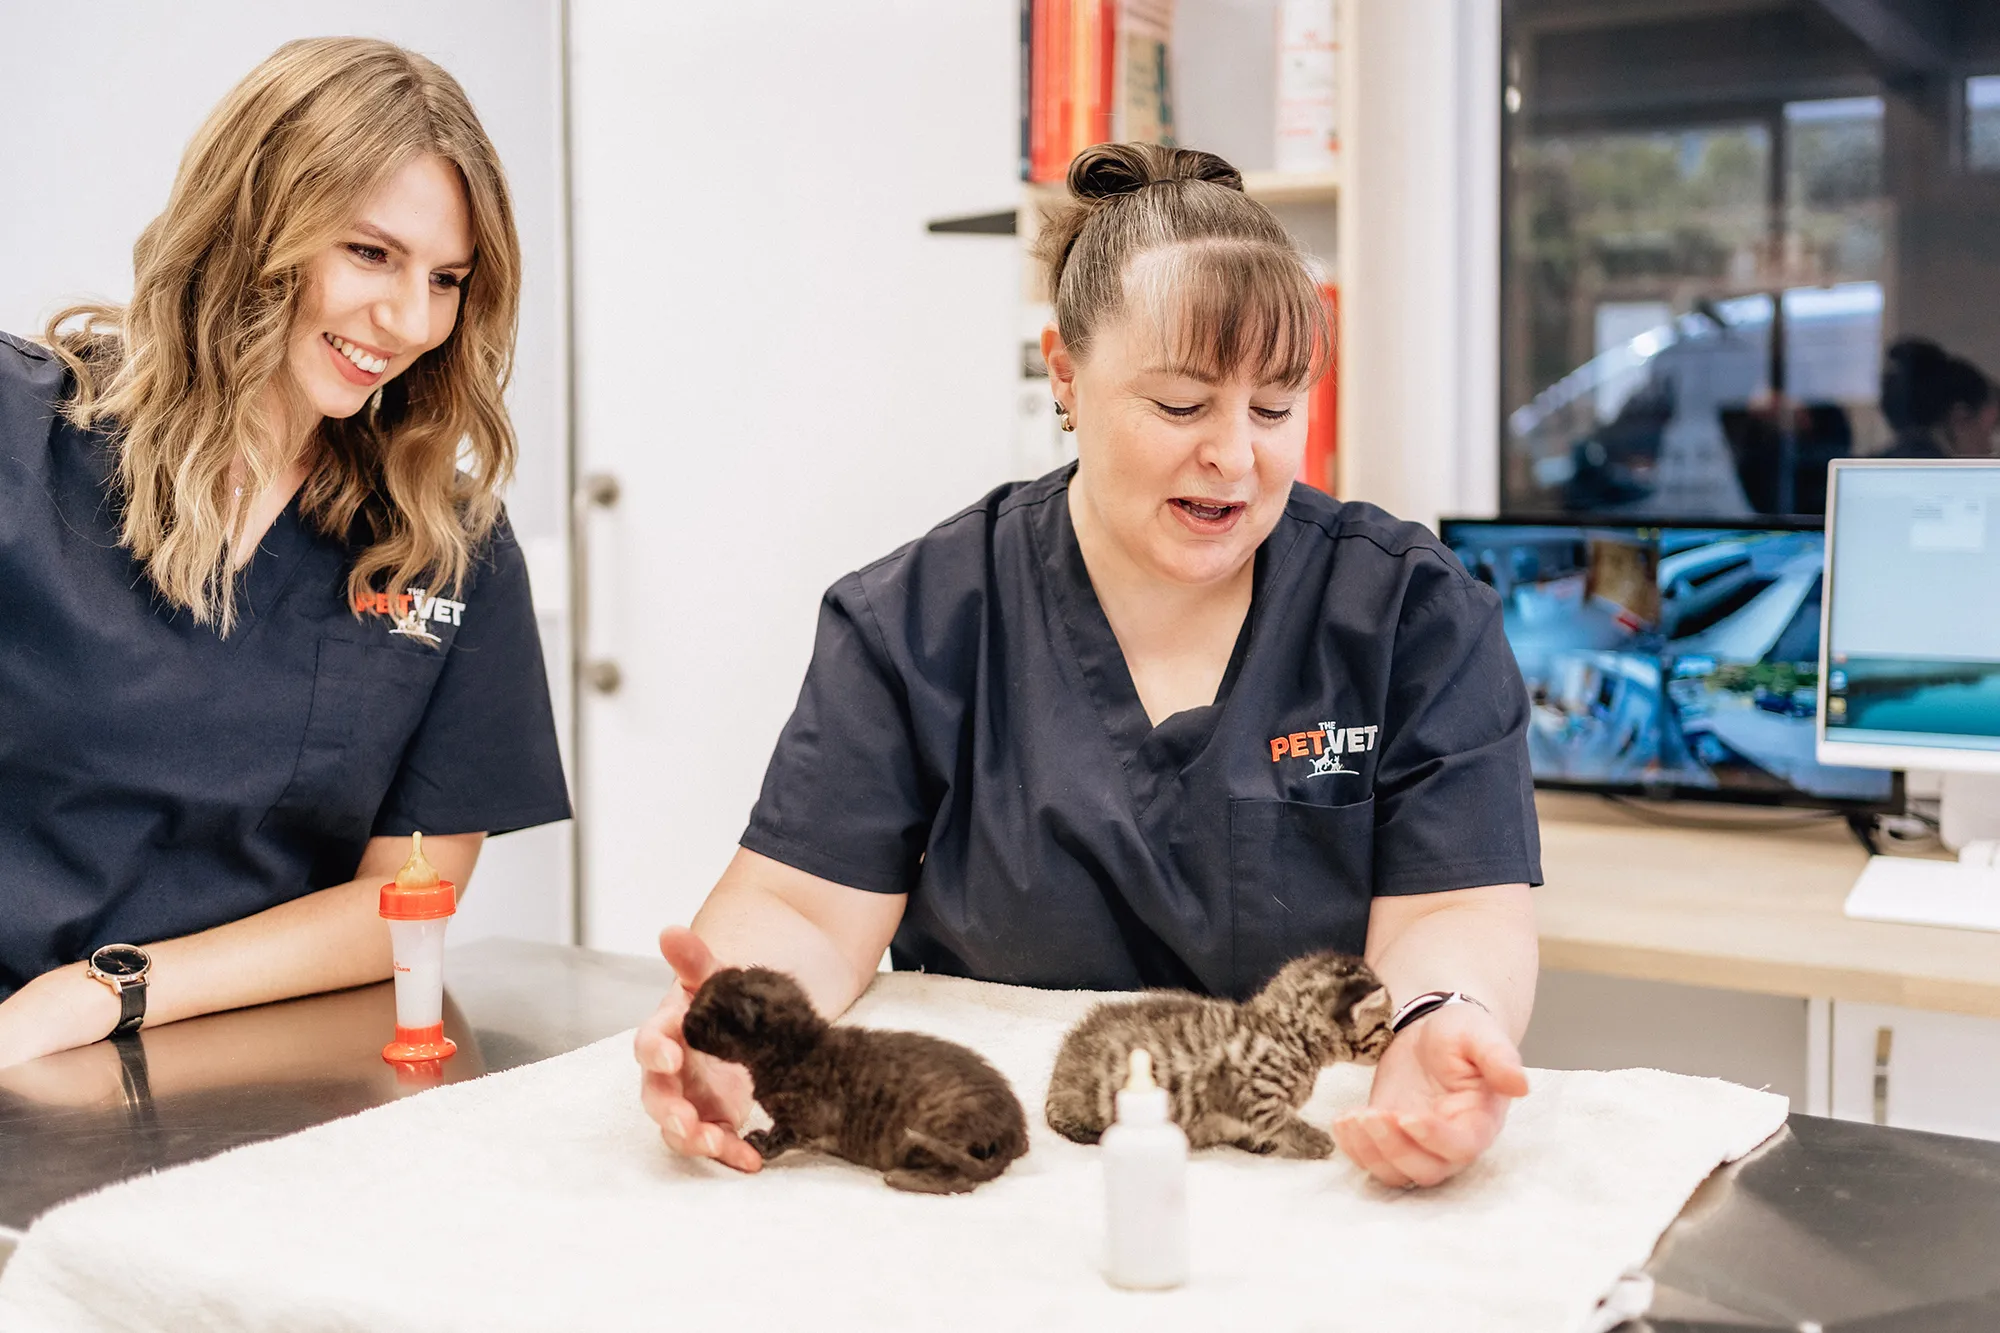 Two Pet Vet female staff members playing with kittens